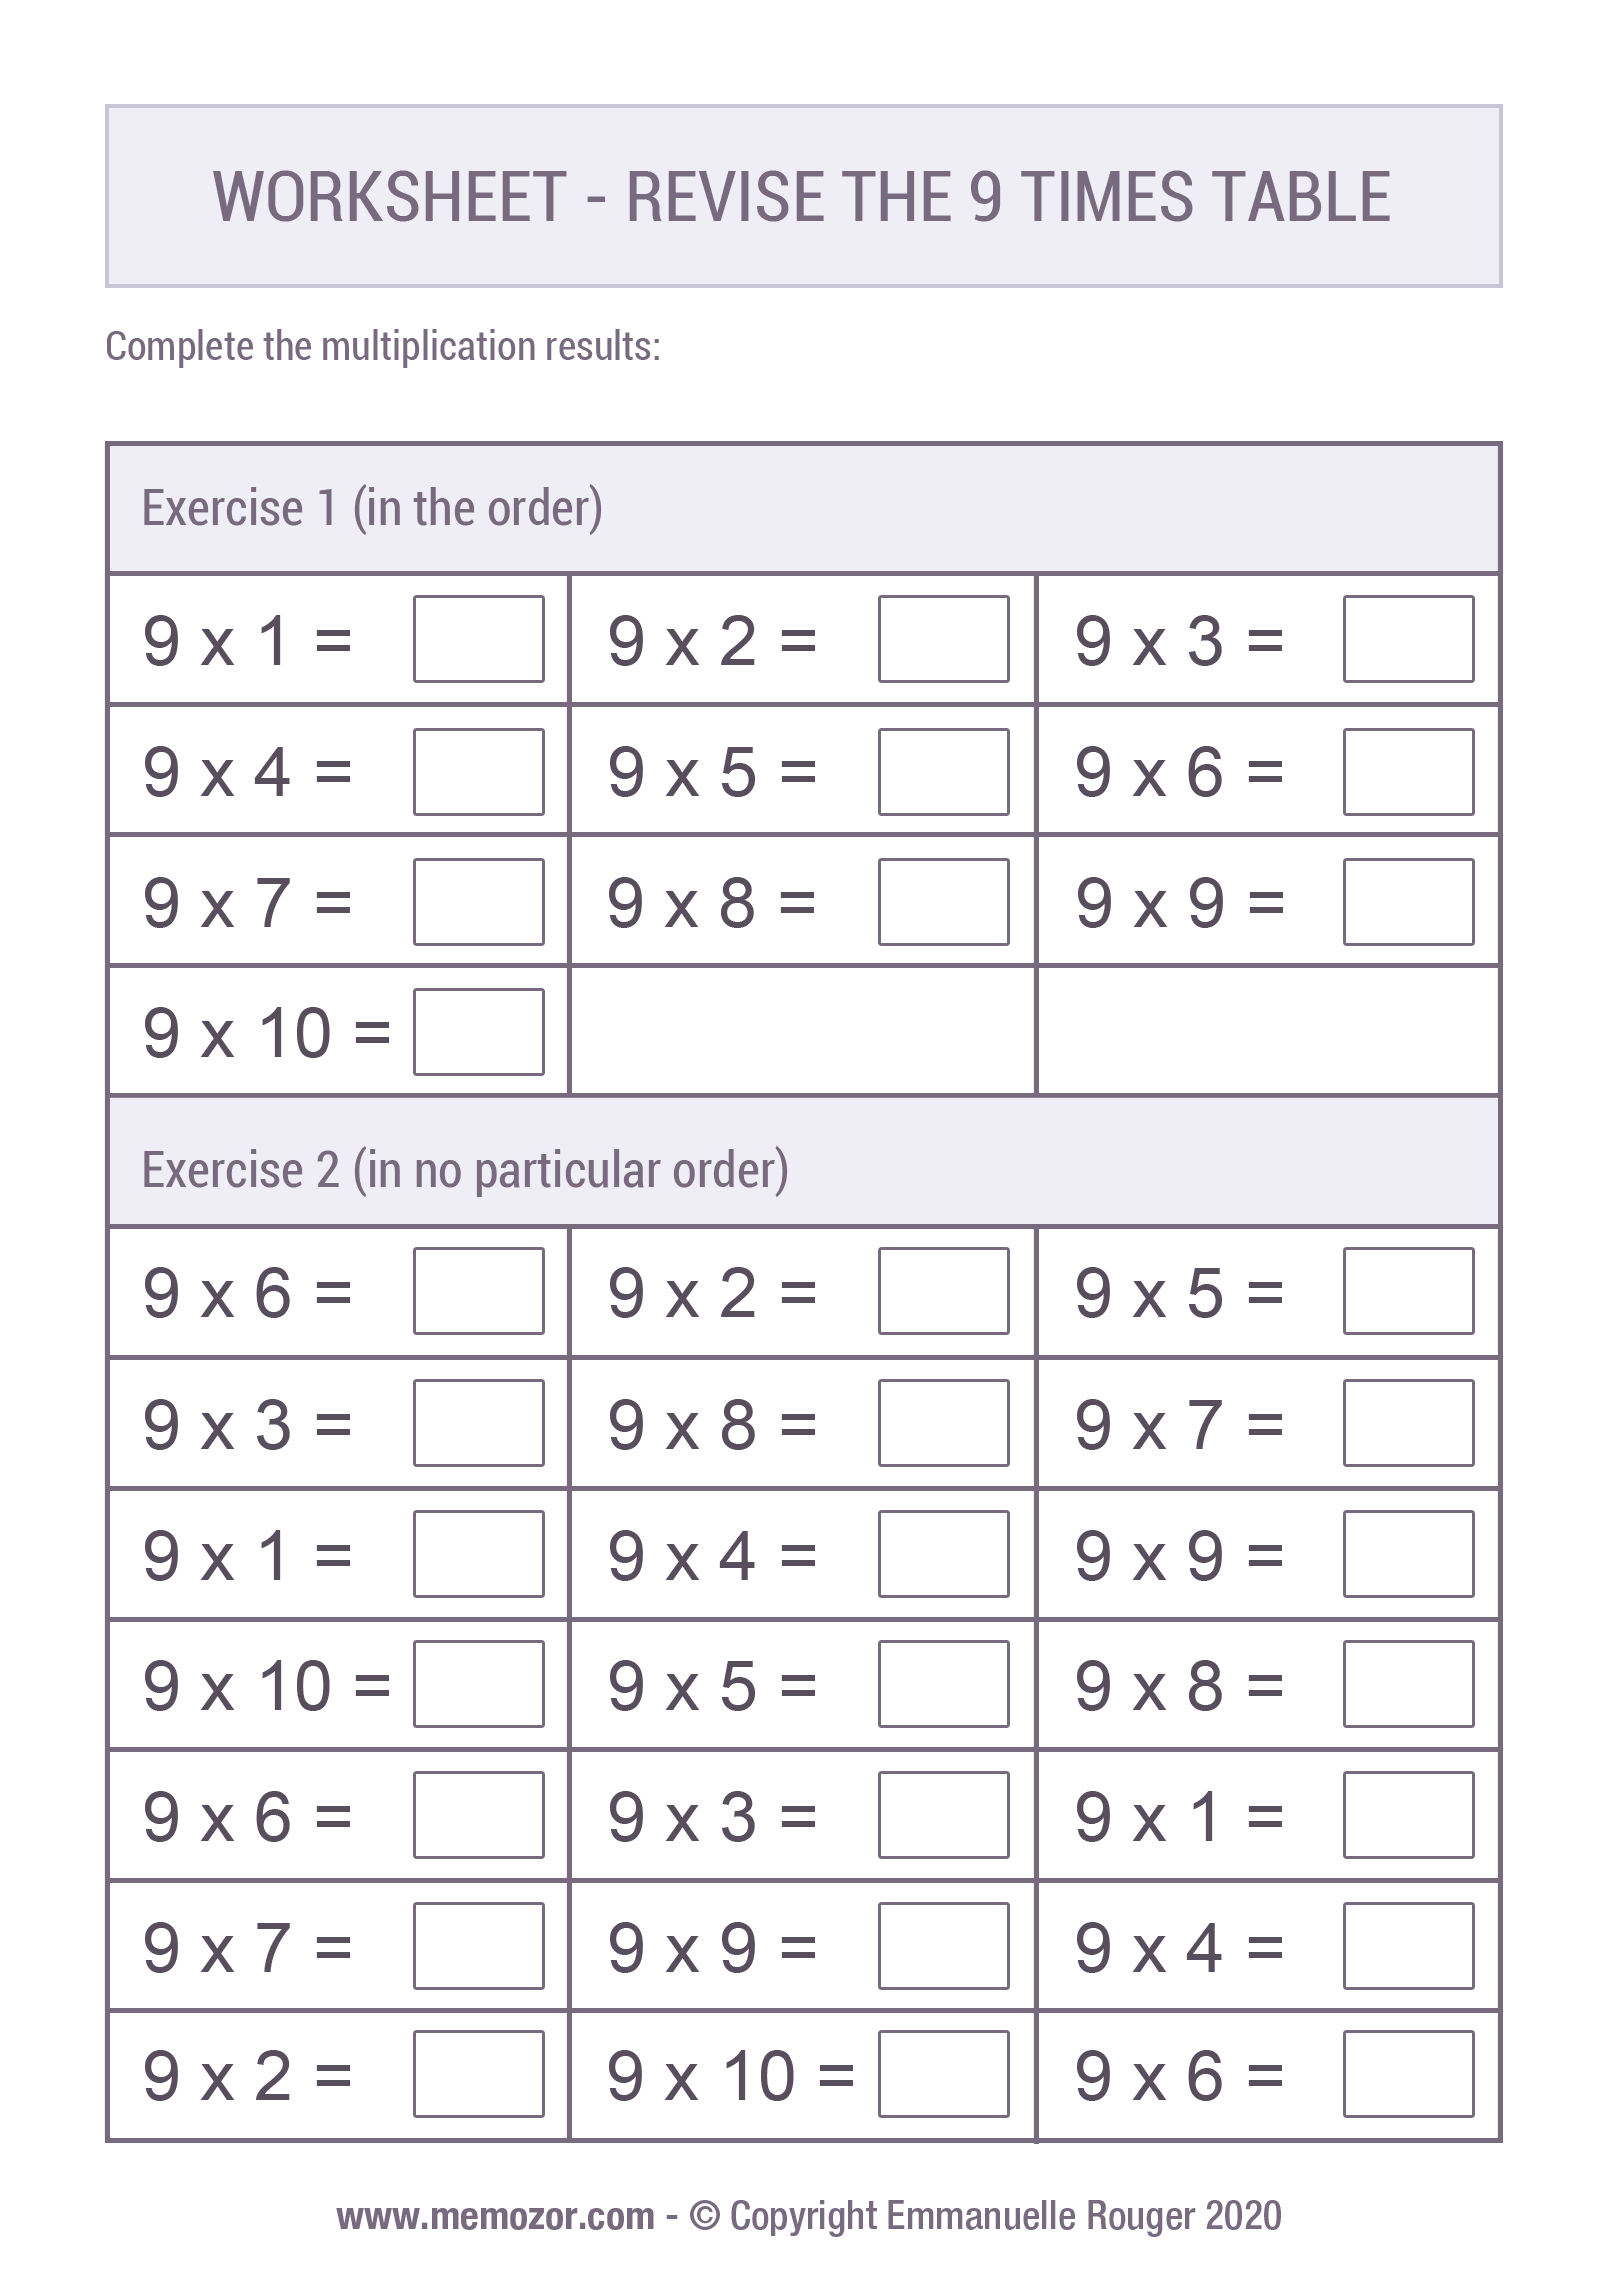 multiplication-table-for-9-free-9-times-table-worksheets-at-images